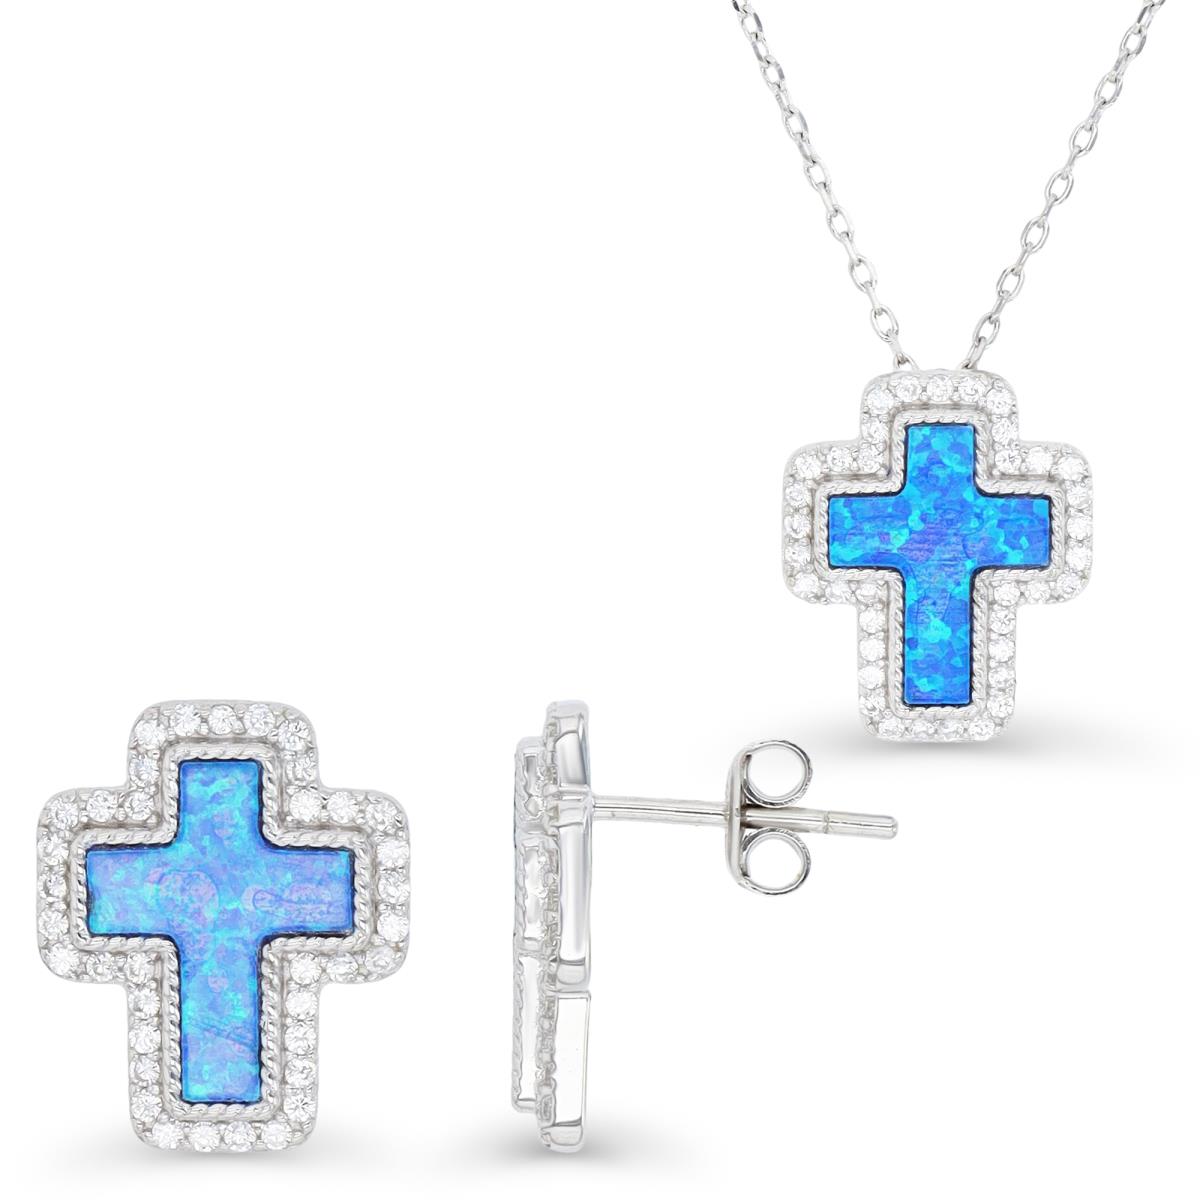 Sterling Silver Rhodium & Cr. Blue Opal and White CZ Cross Earrings and Necklace Set